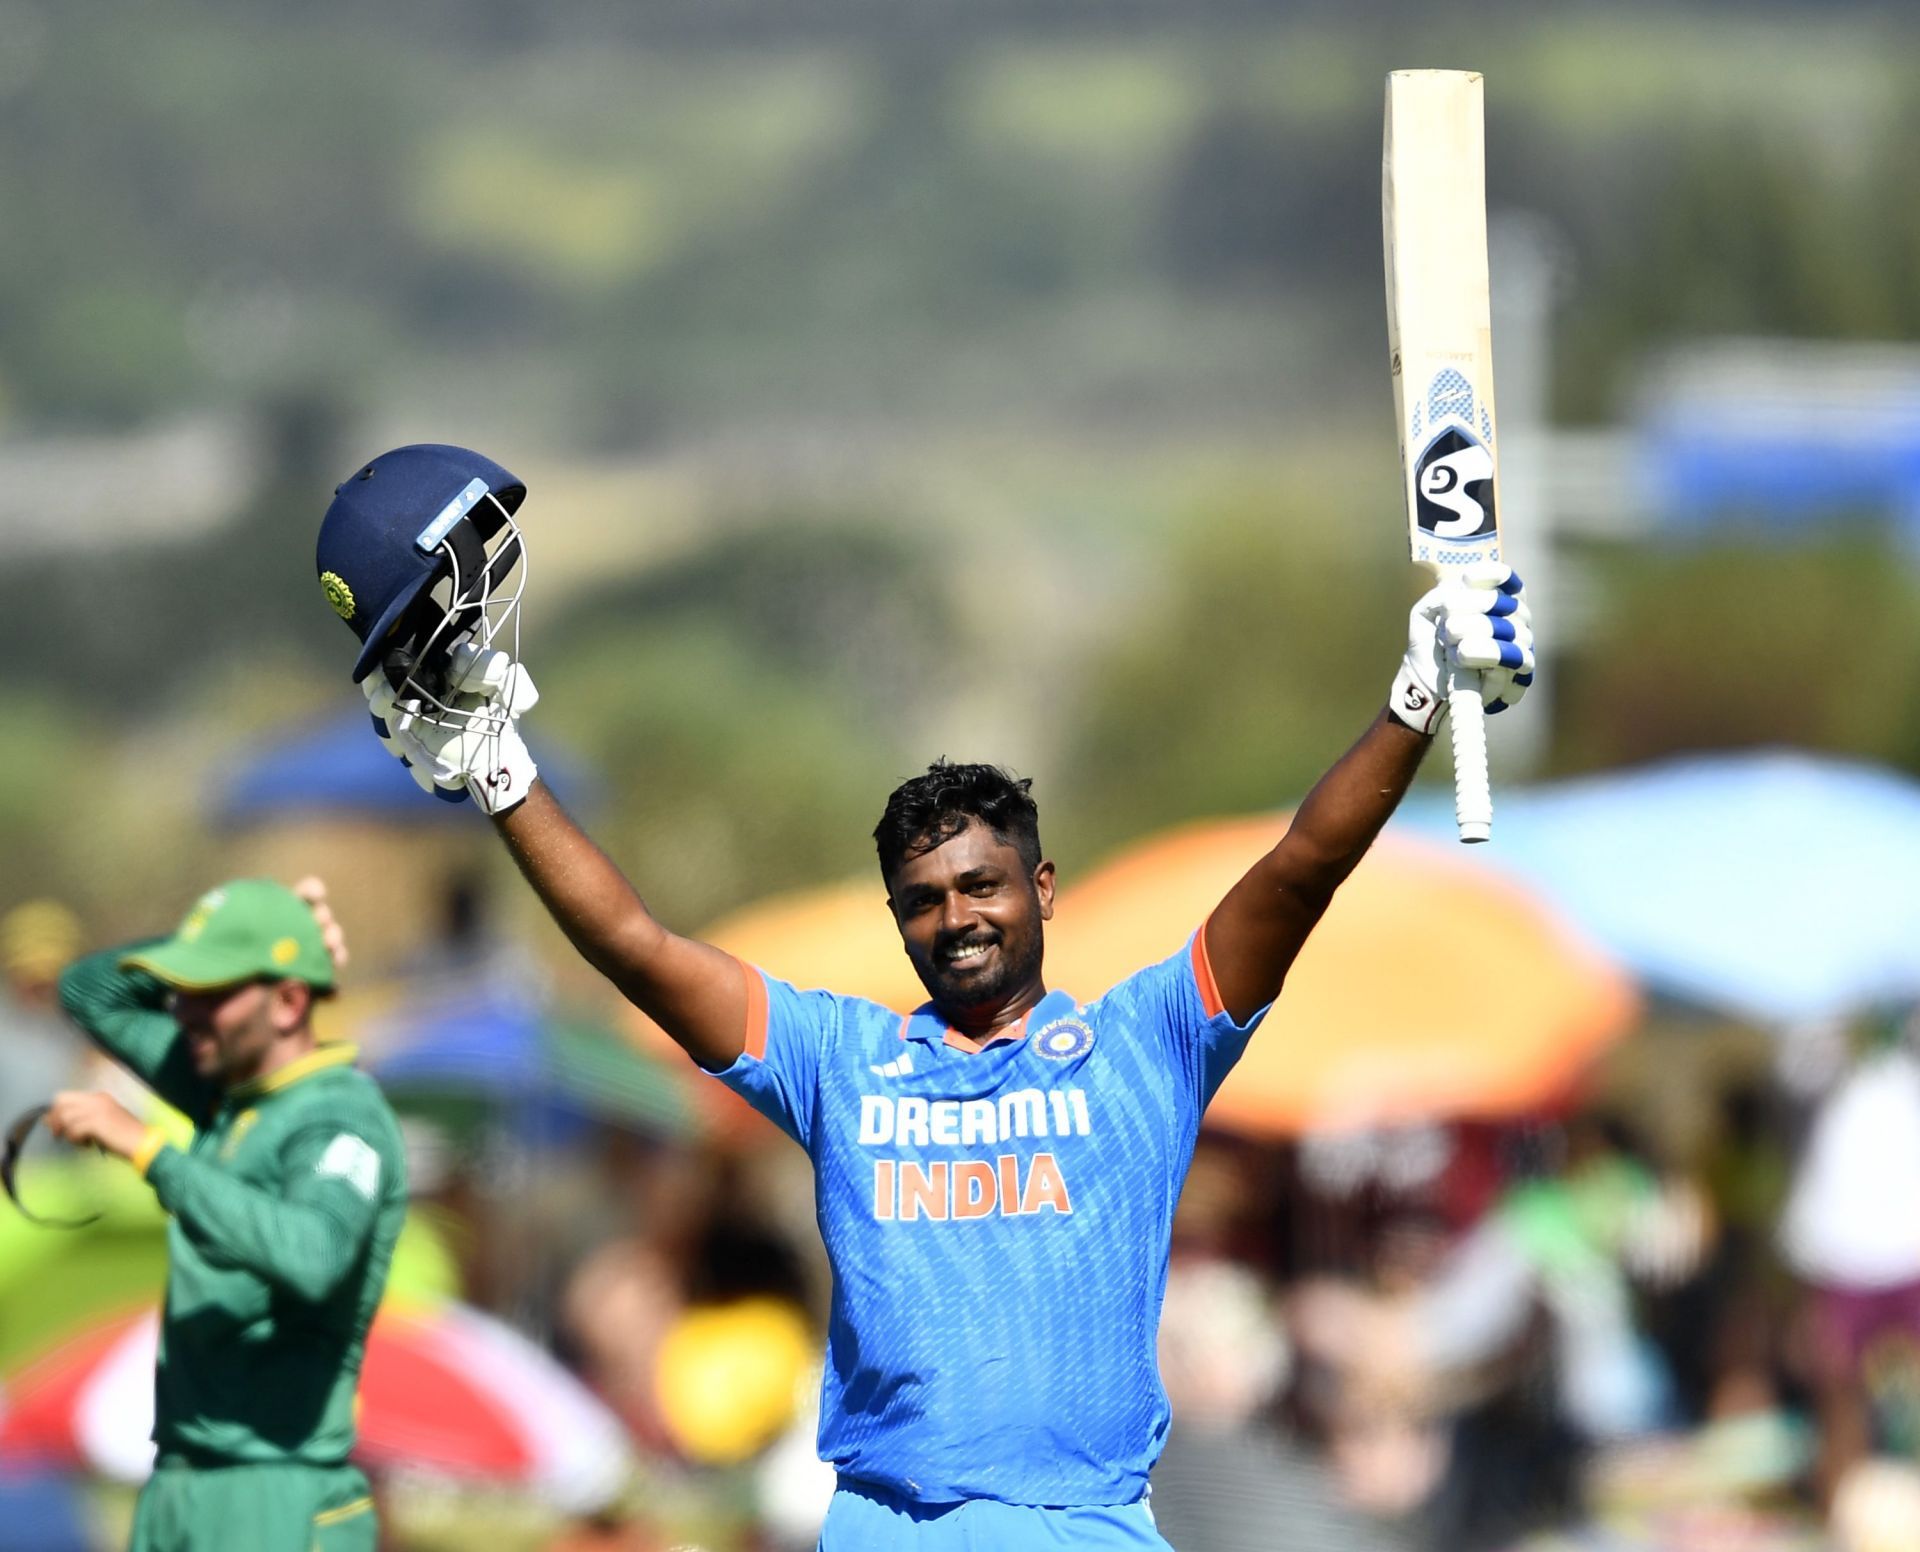 Sanju Samson&#039;s century in the final ODI against South Africa might have earned him a place in India&#039;s T20I side. [P/C: Getty]